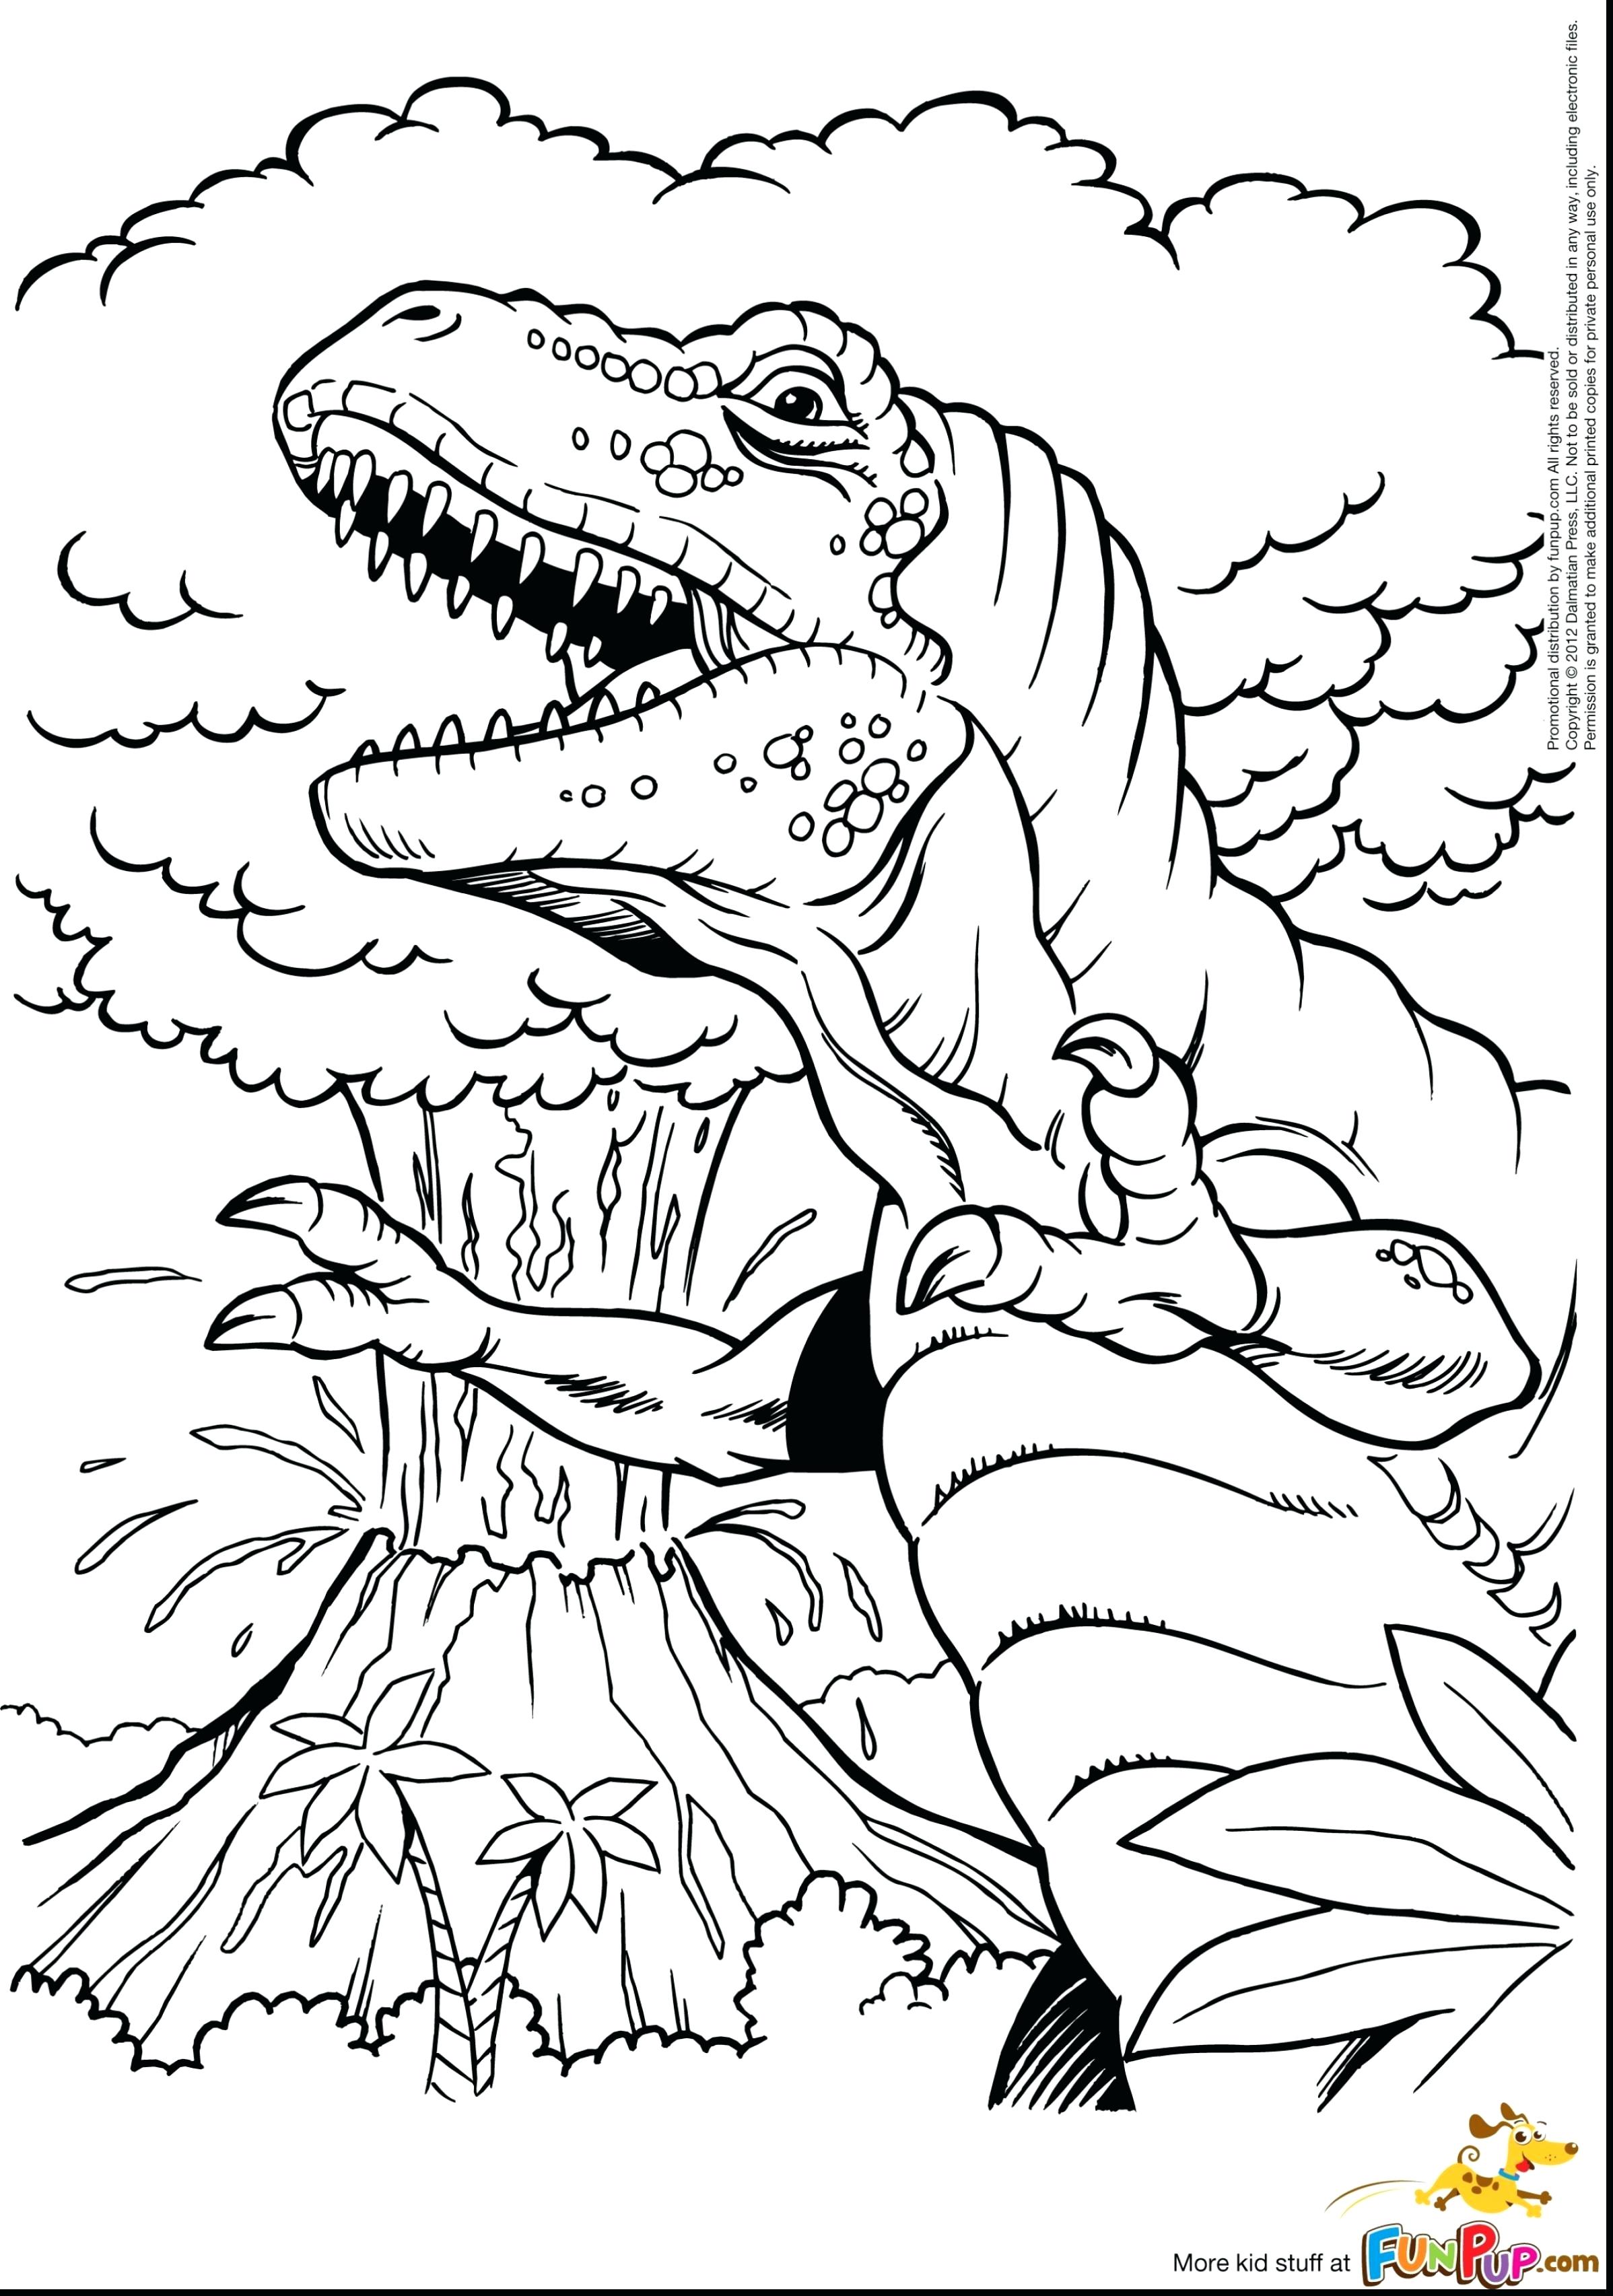 T Rex Dinosaur Coloring Pages at GetColorings com Free printable